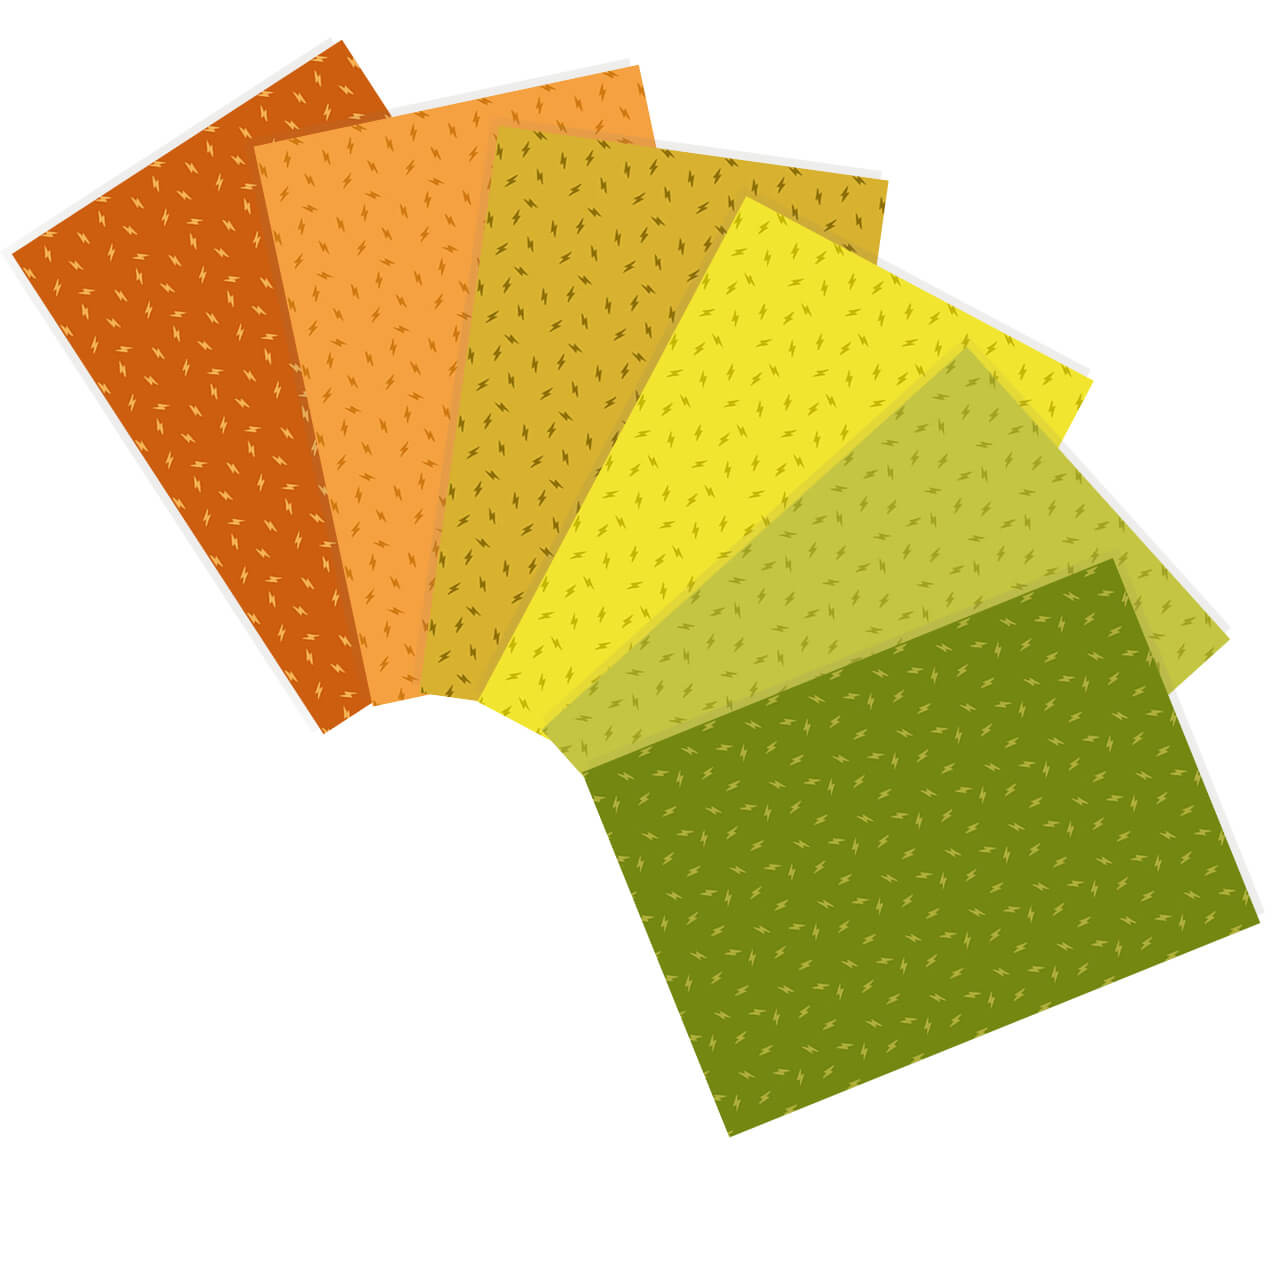 6 Atomic Citrus fat quarters from Andover Fabrics, fanned out showcasing vibrant green, yellow, and orange hues.